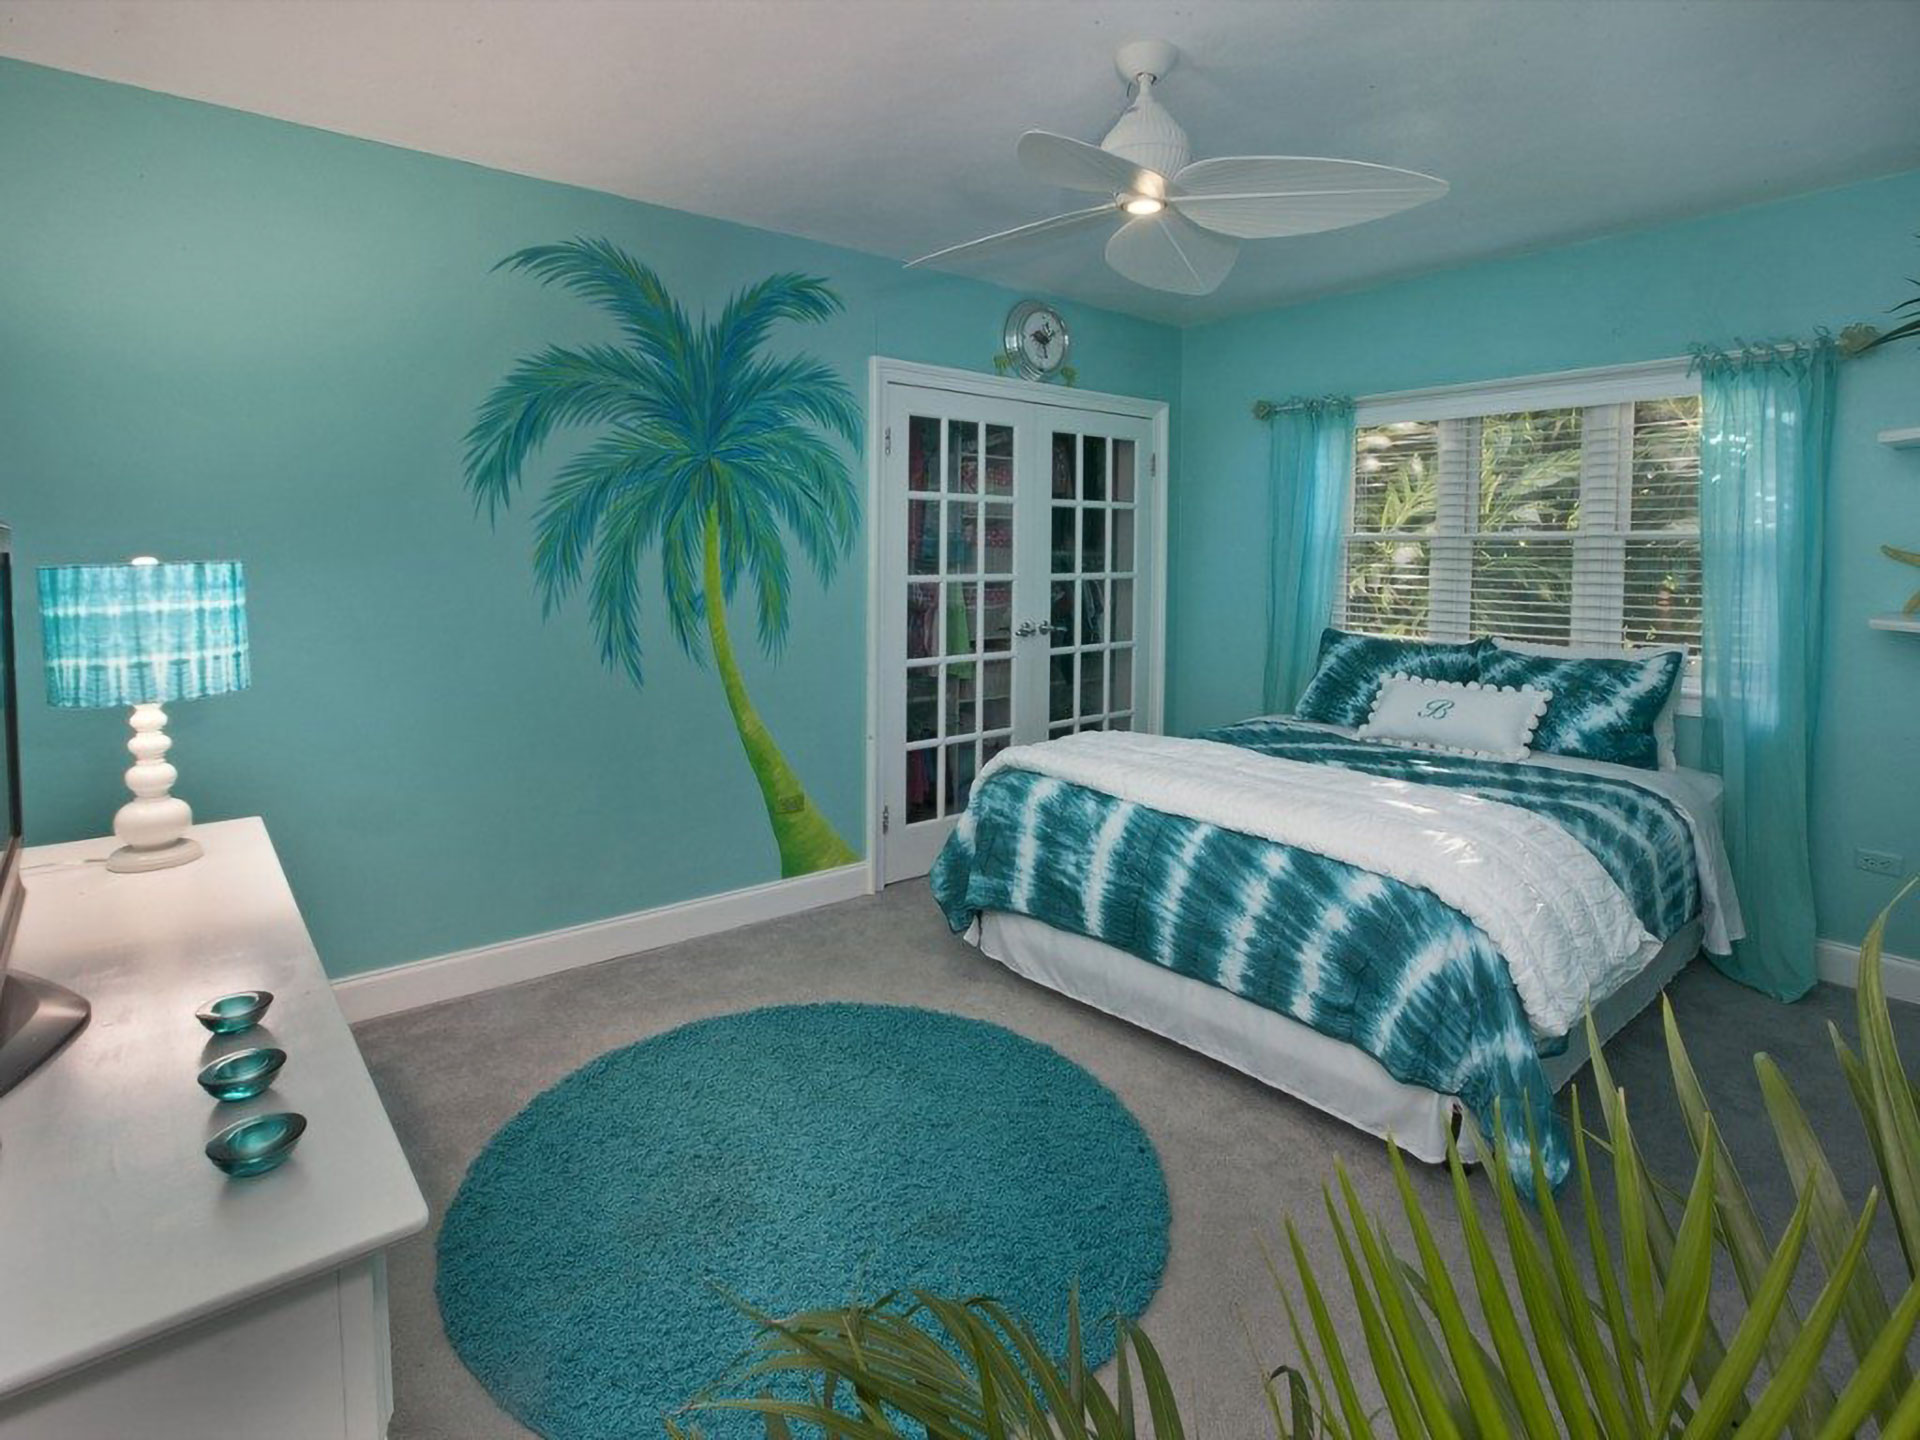 beach themed decorations for living room